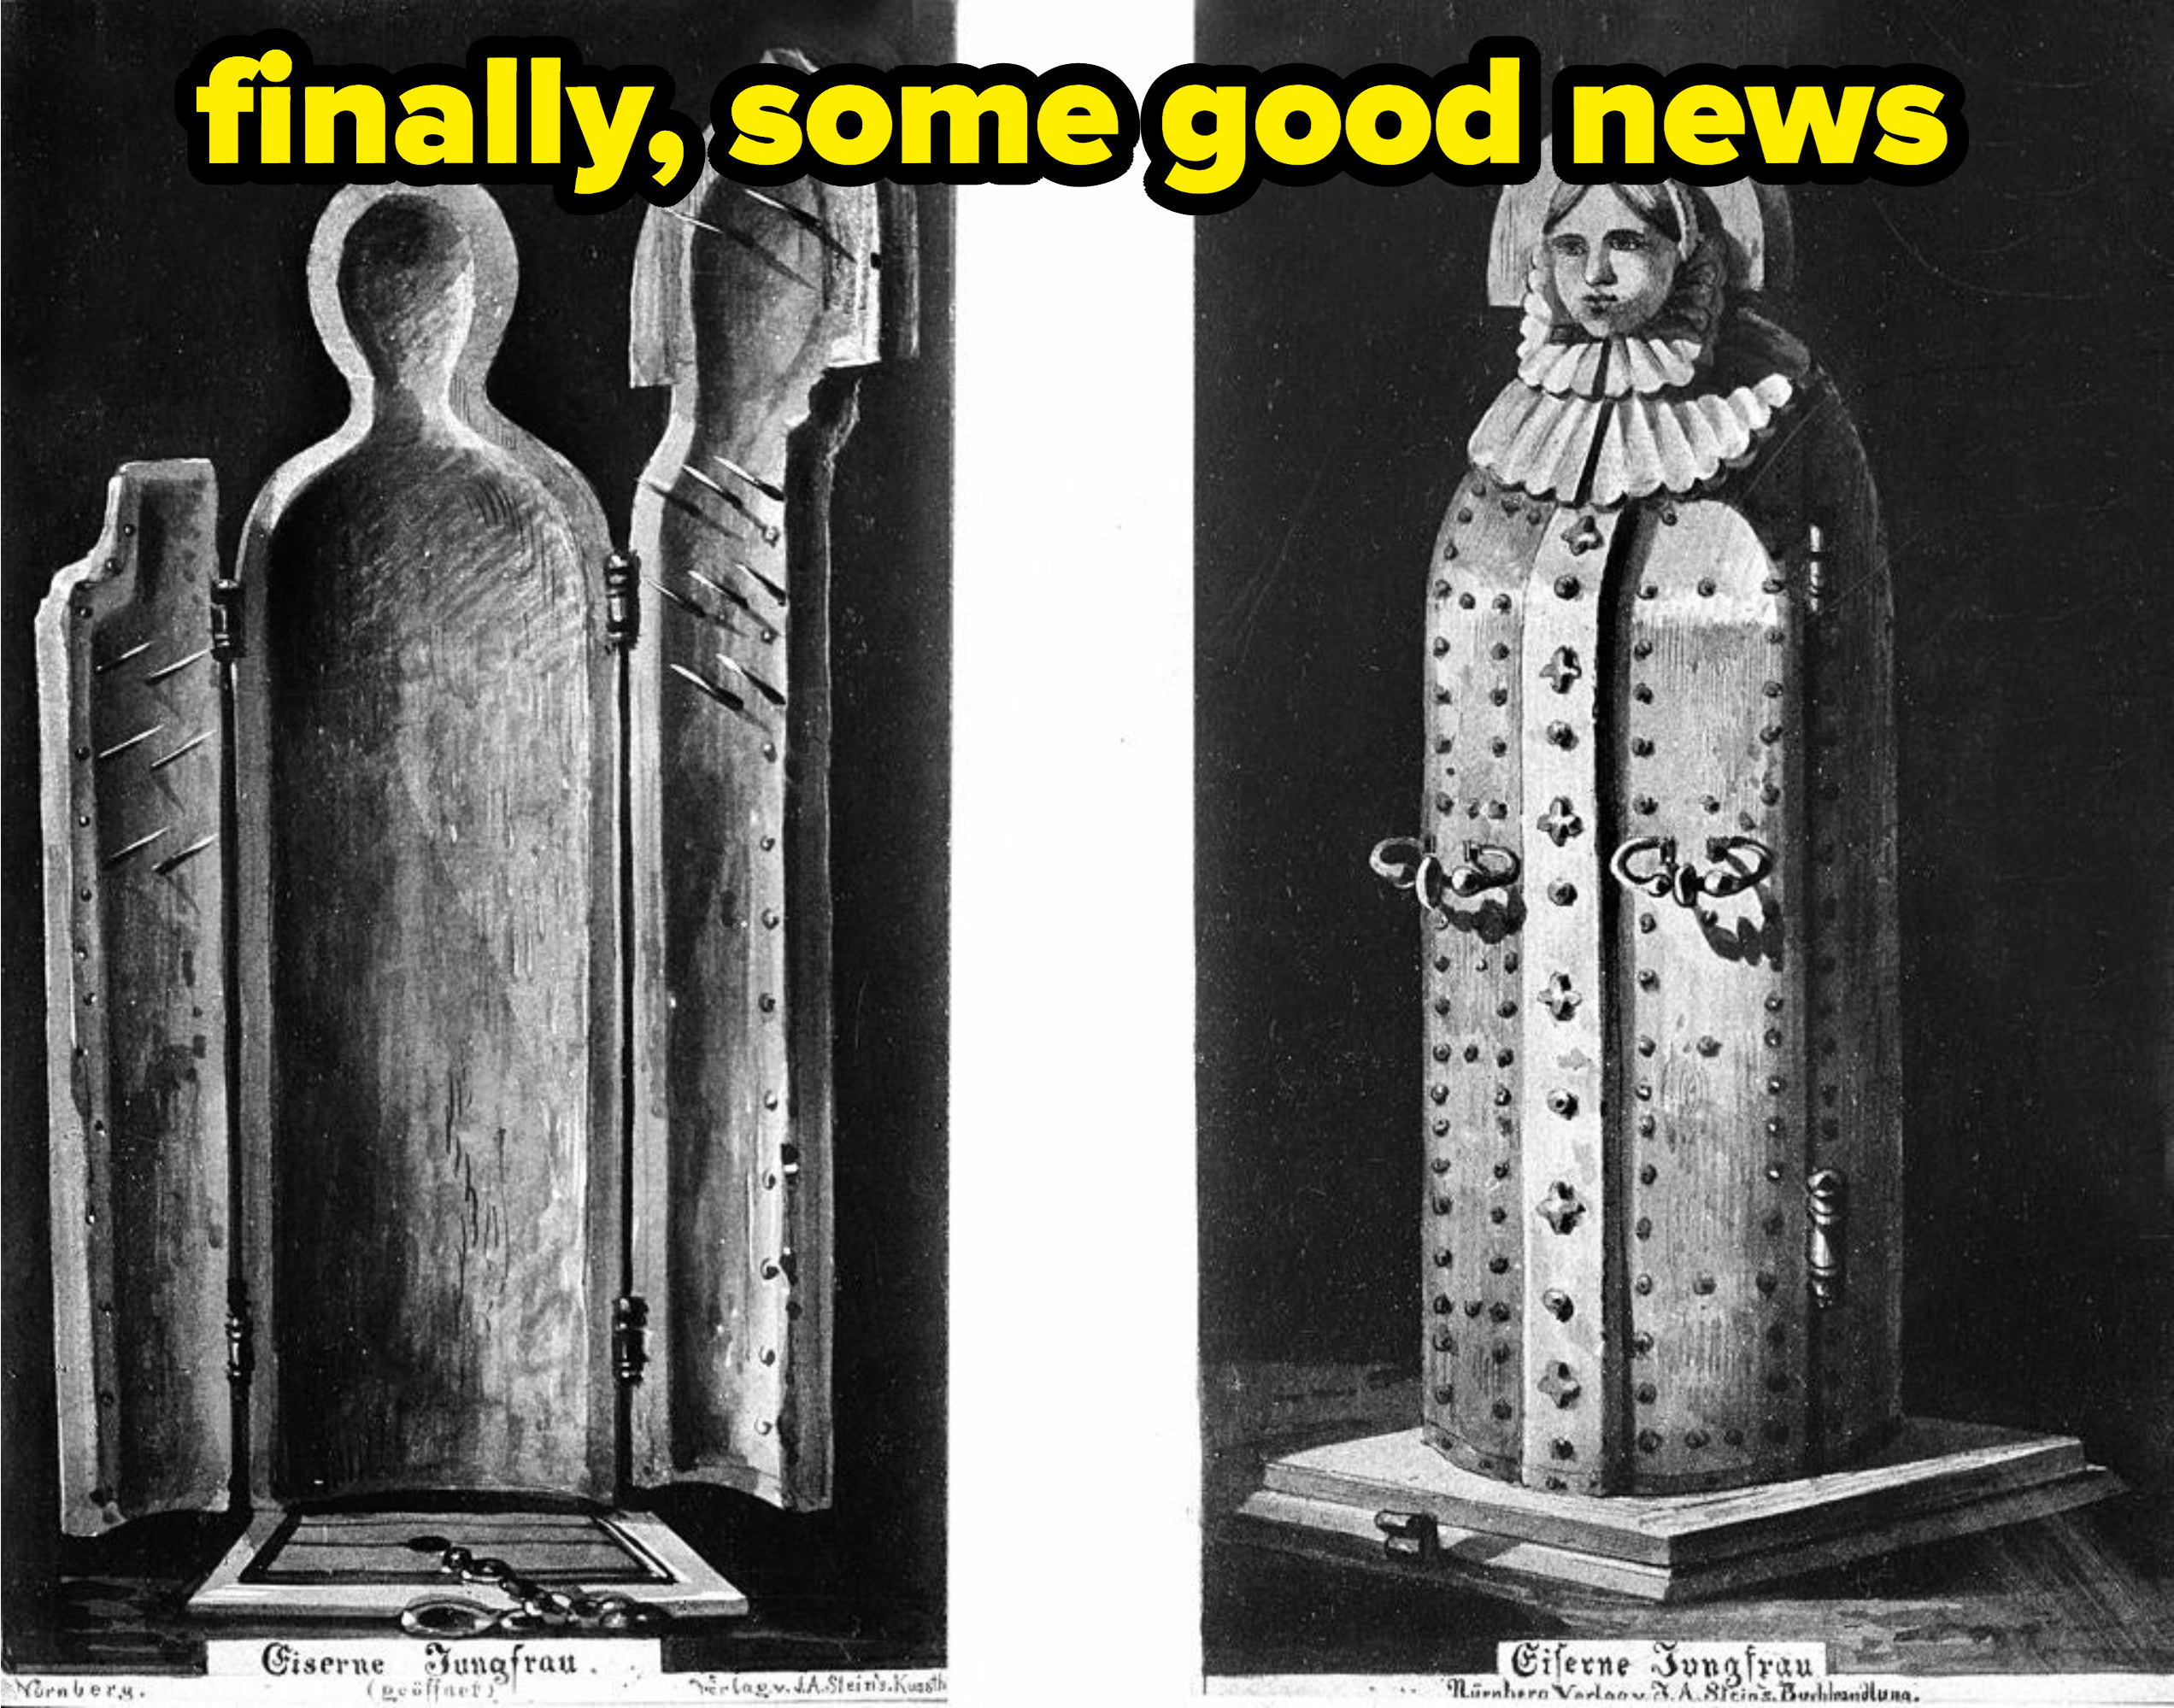 another picture of an iron maiden, with caption: finally, some good news